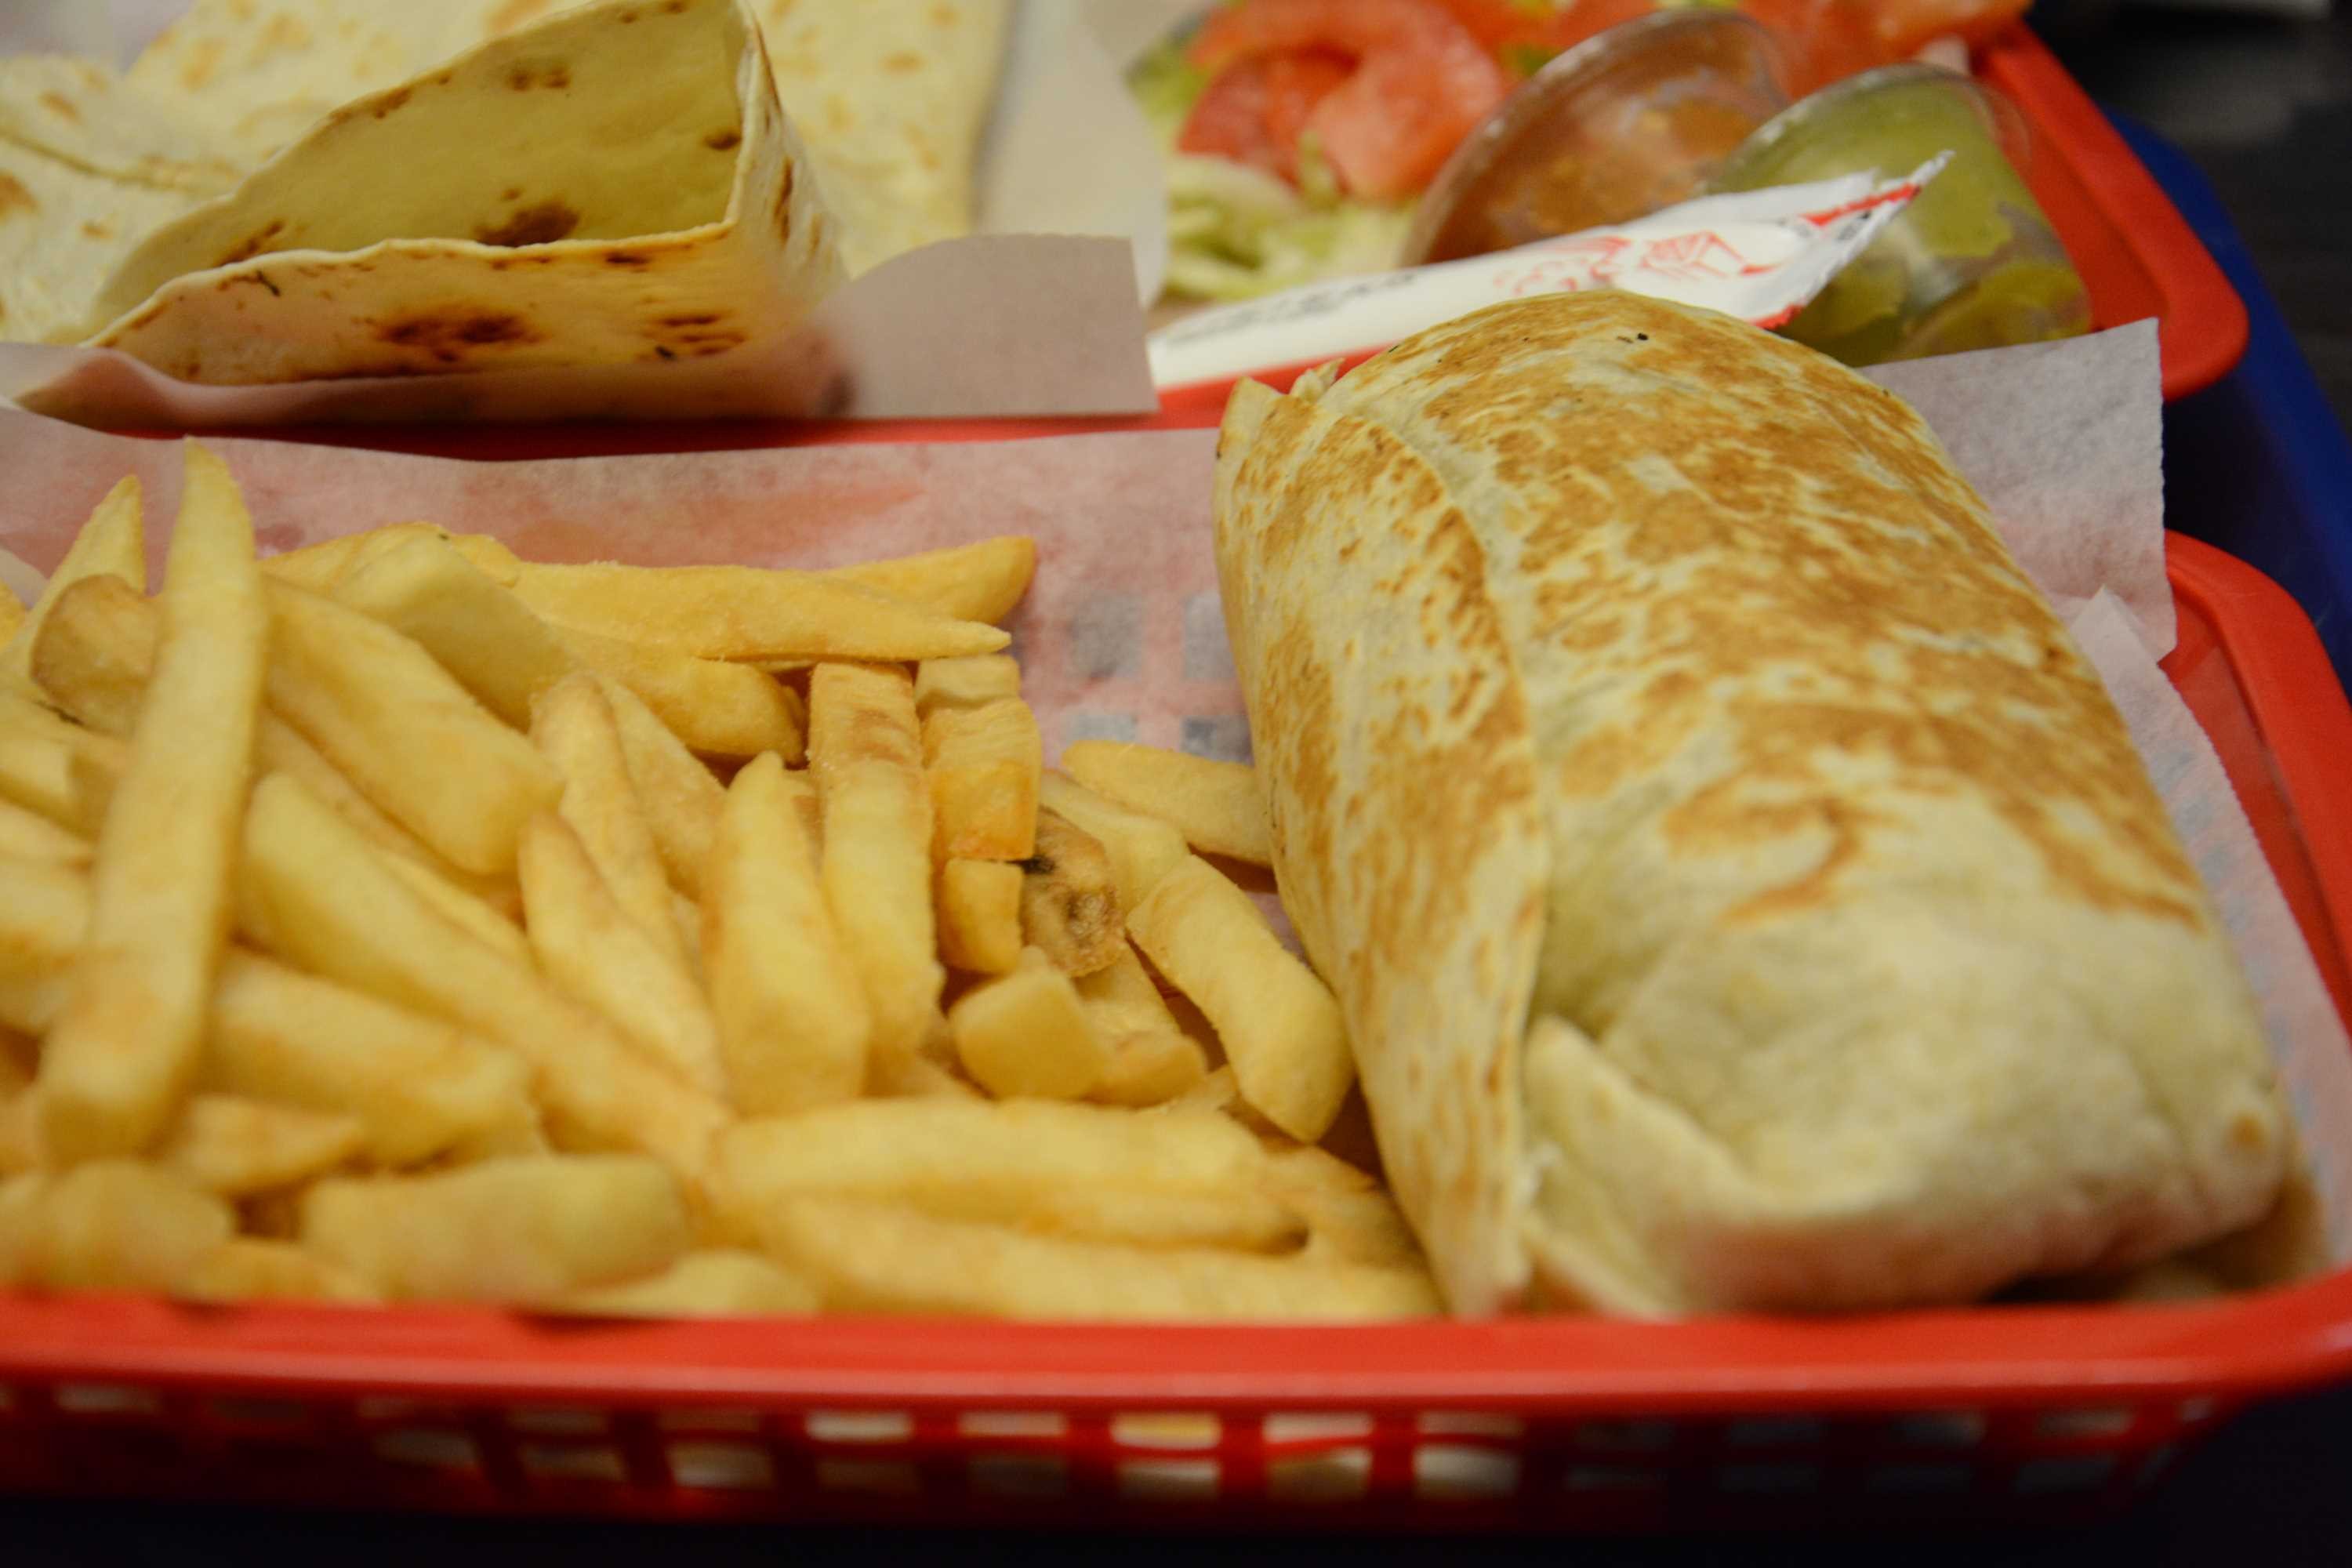 Burrito with Fries